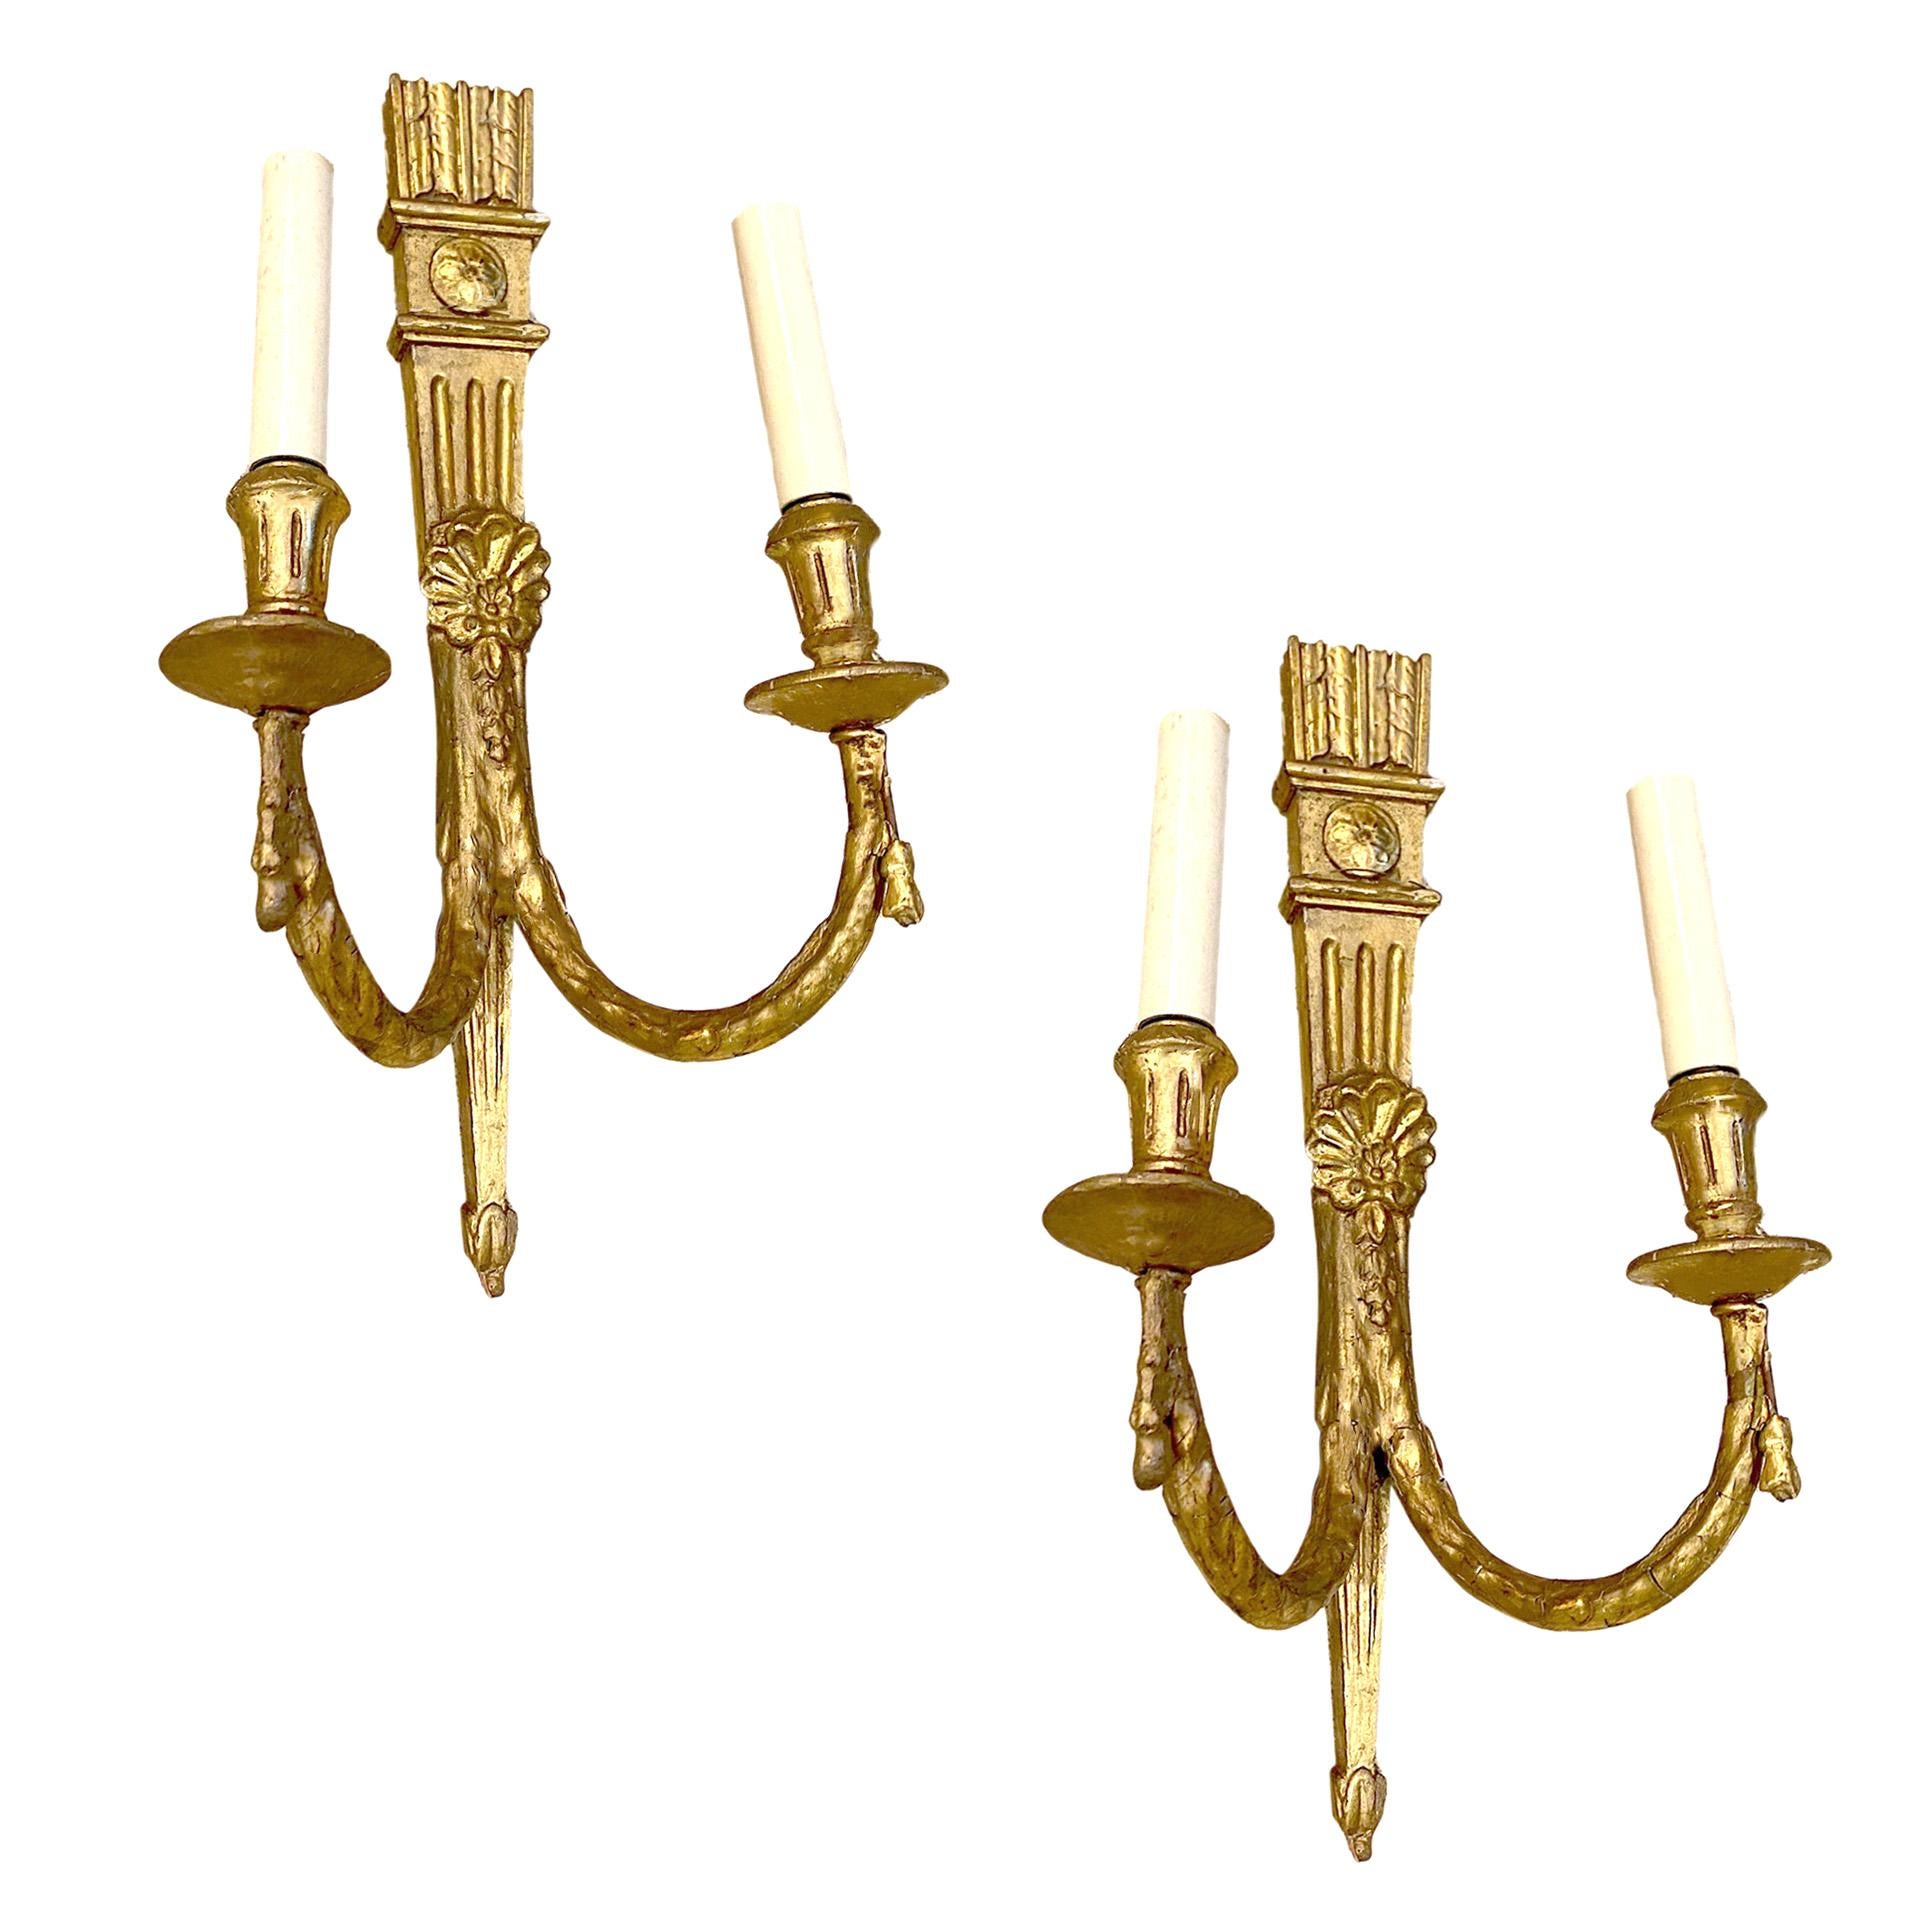 Pair of antique circa 1920s French carved and giltwood neoclassic style sconces.

Measurements:
Height 17